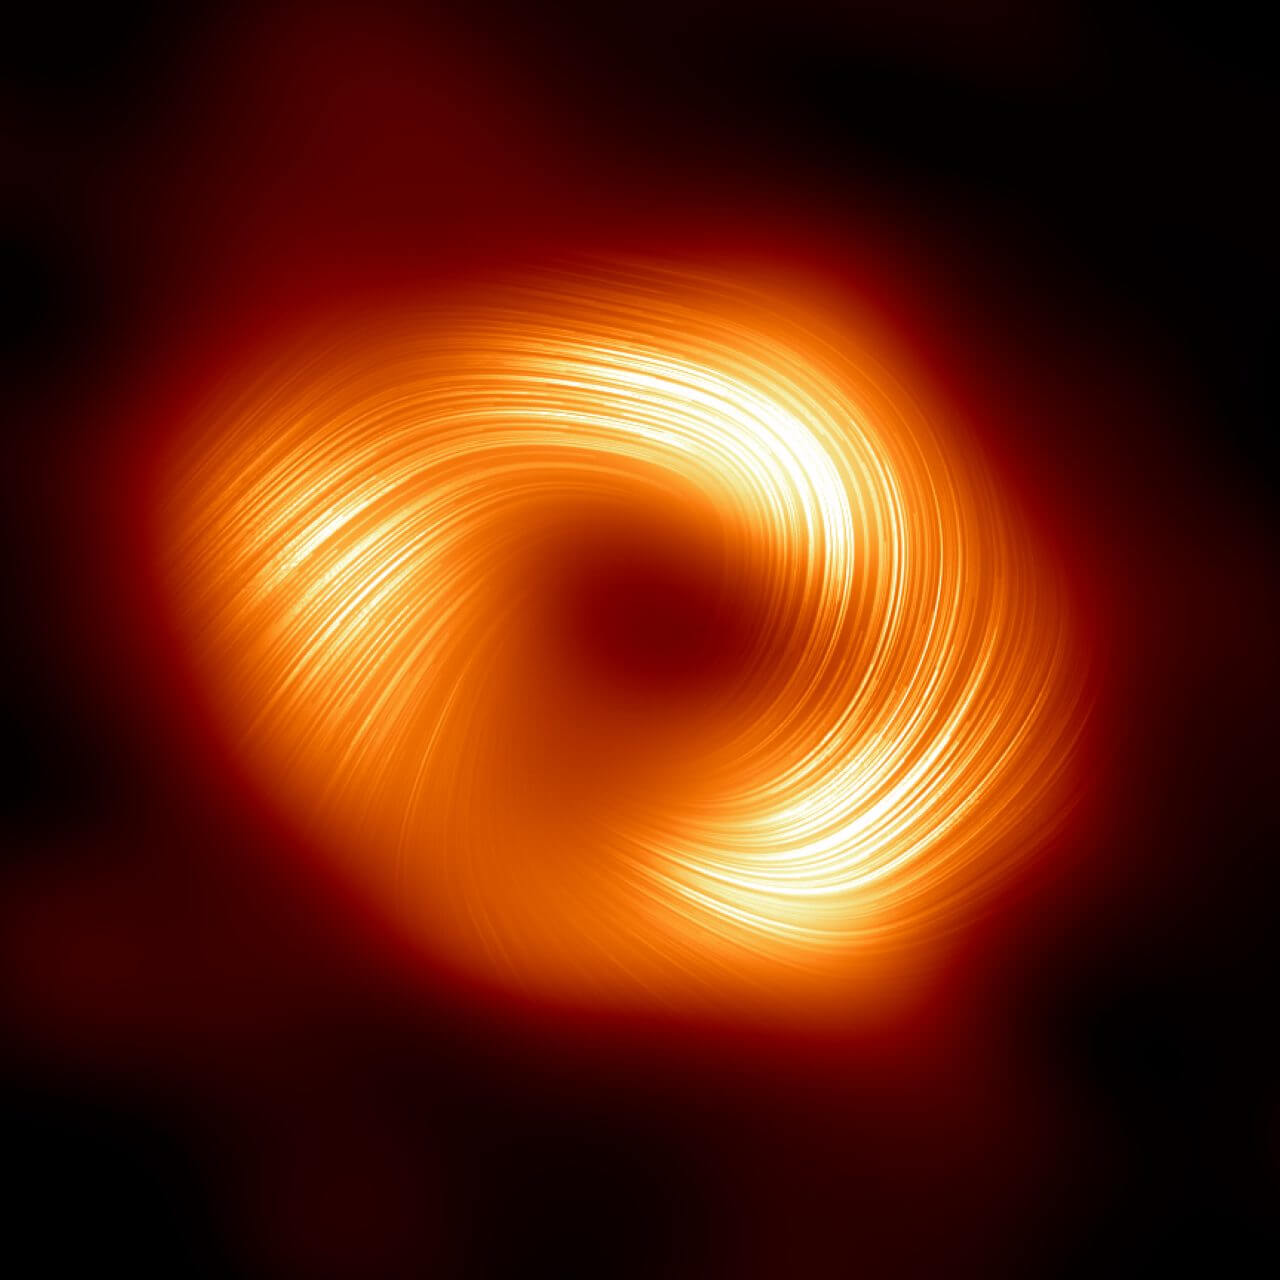 An international research team releases new images of the giant black hole in the Milky Way Galaxy, Sagittarius A* |  Satellite portal website sorae